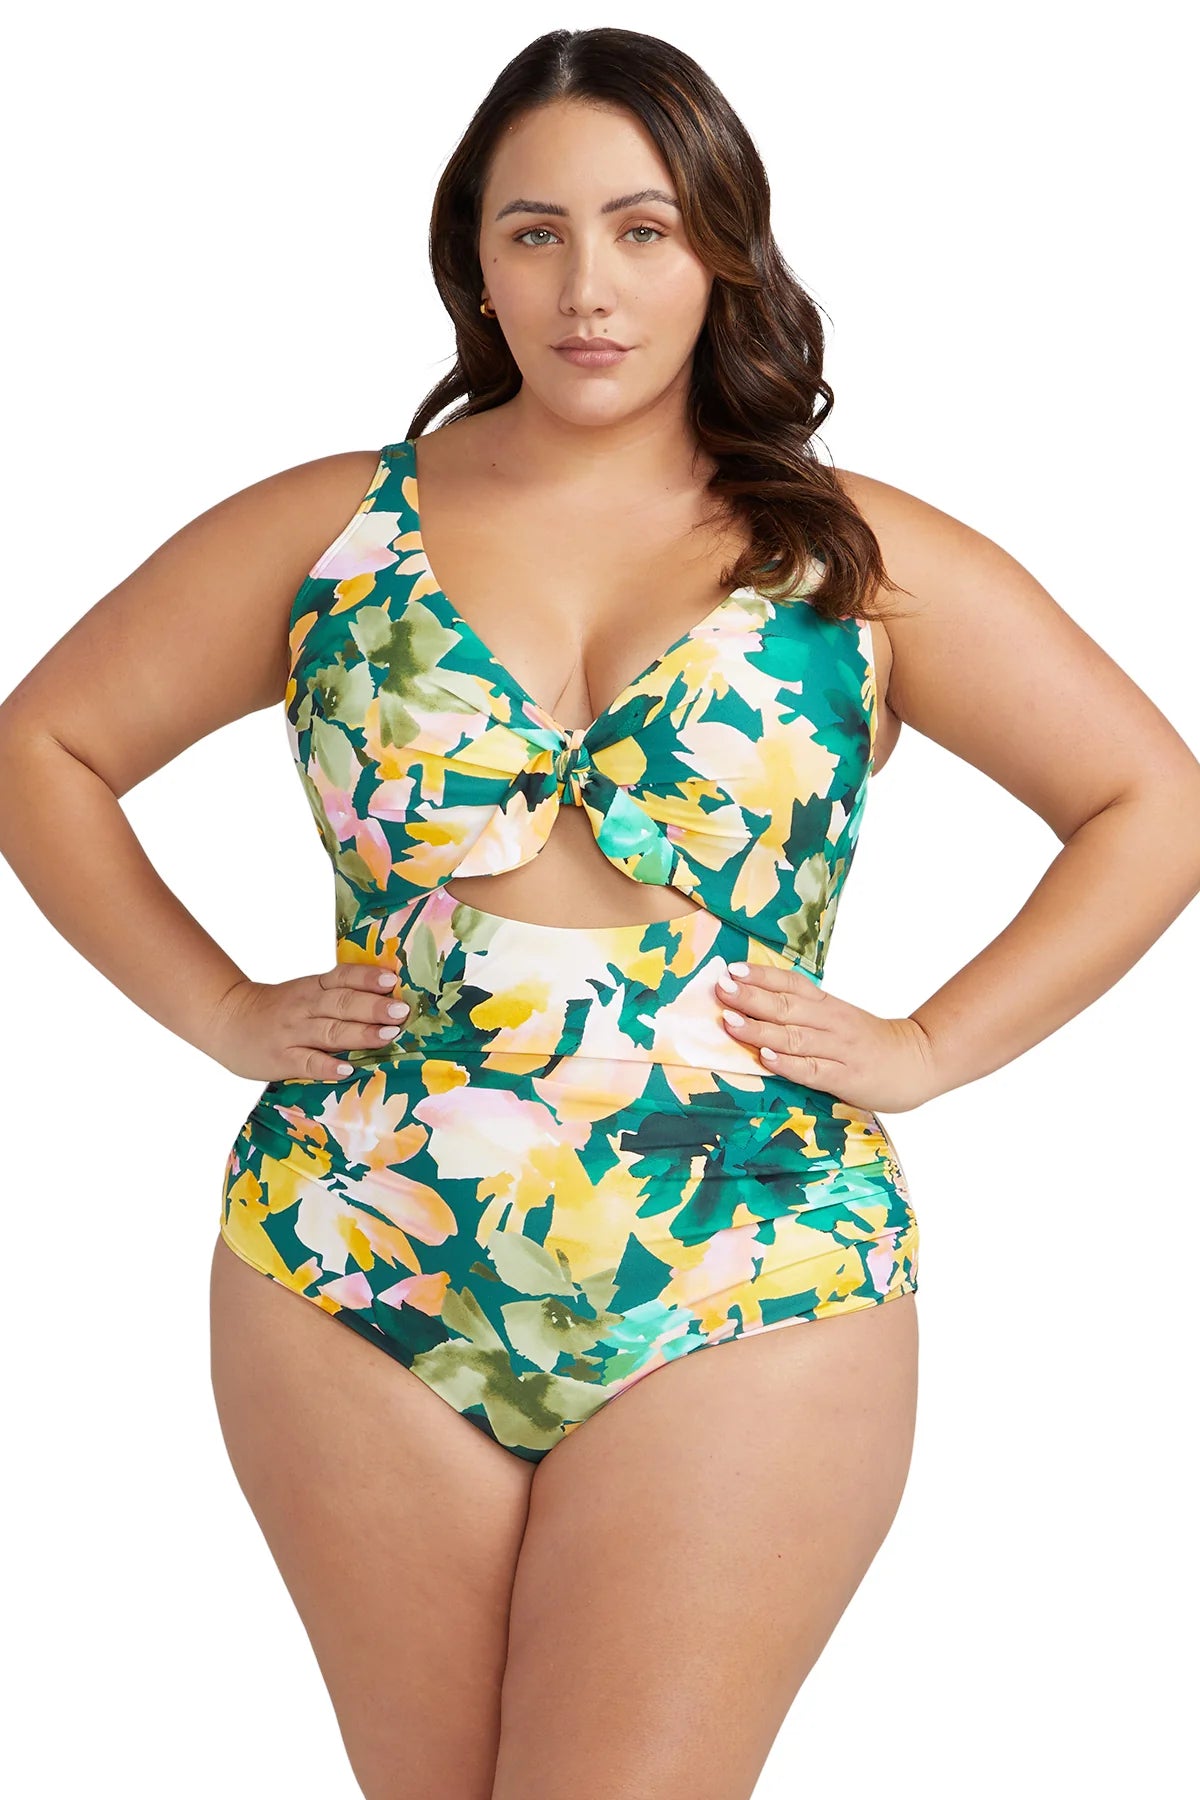 2023 Conservative Womens Two Piece Polka Dot Swimsuit With Push Up Shorts  And Tankini Plus Size Bathing Suit For Beachwear From Xmlongbida, $13.06